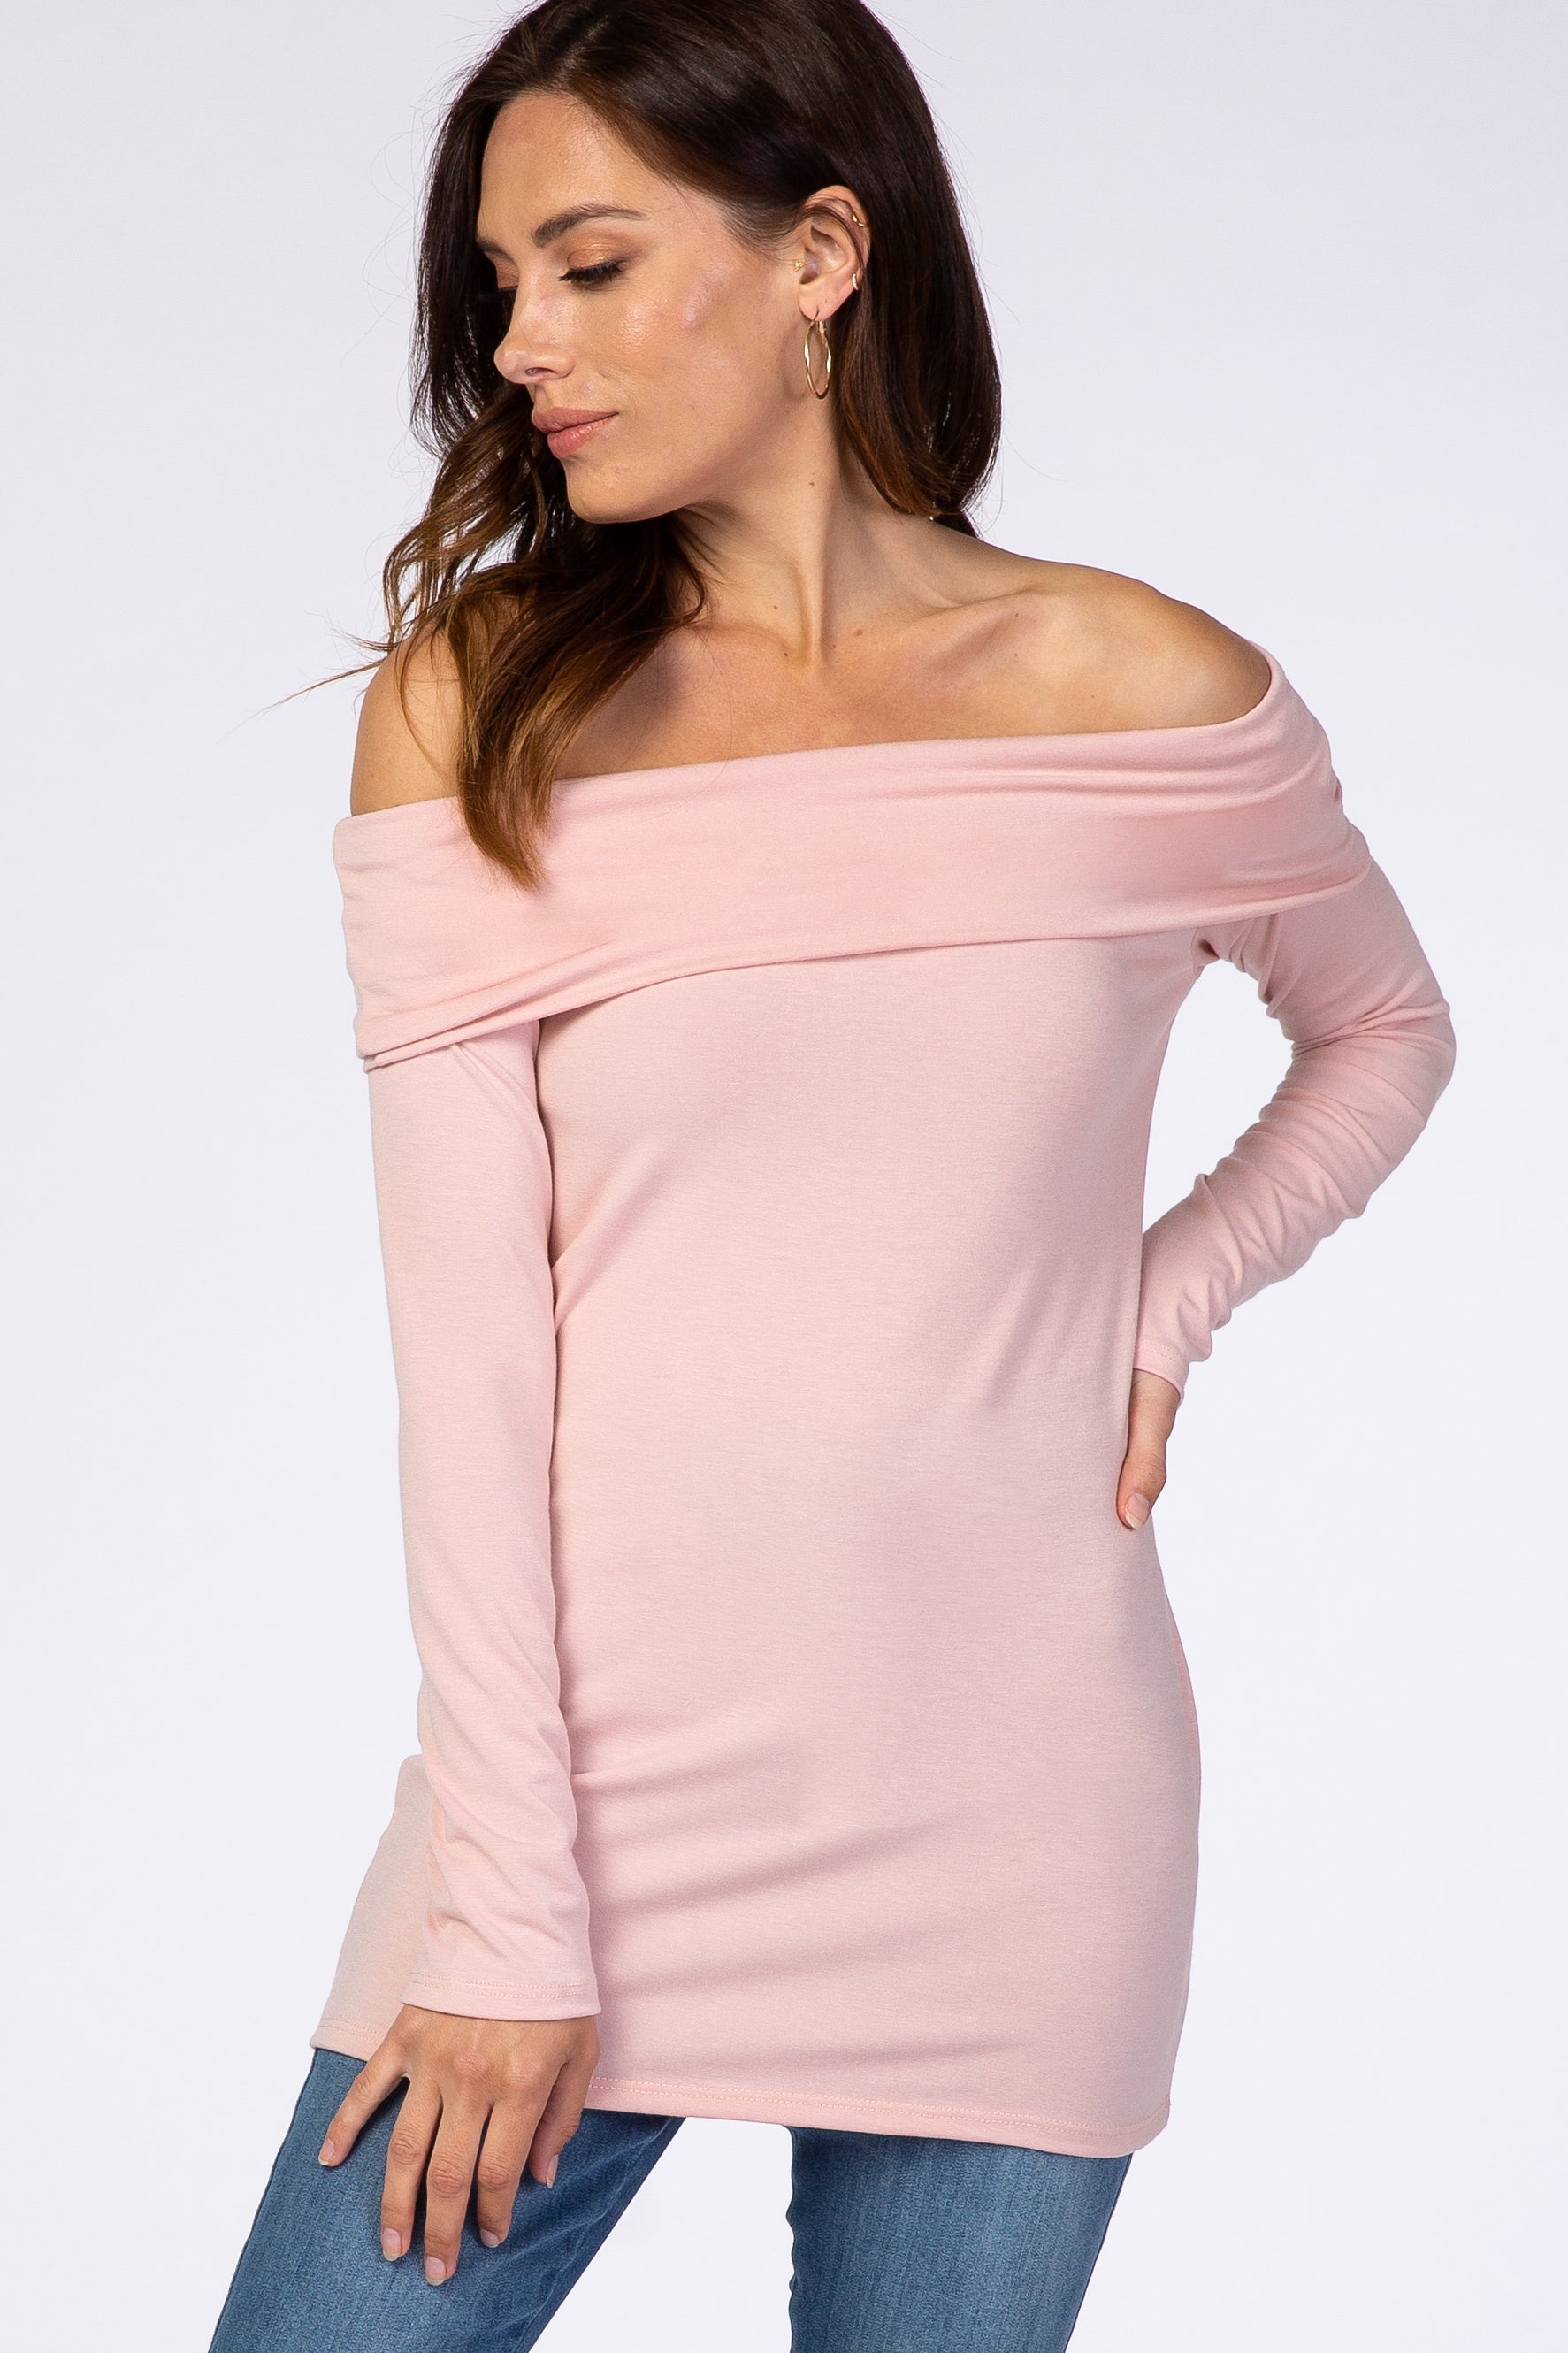 Women's Off Shoulder Top - Lace Border / Long Sleeves / Pink